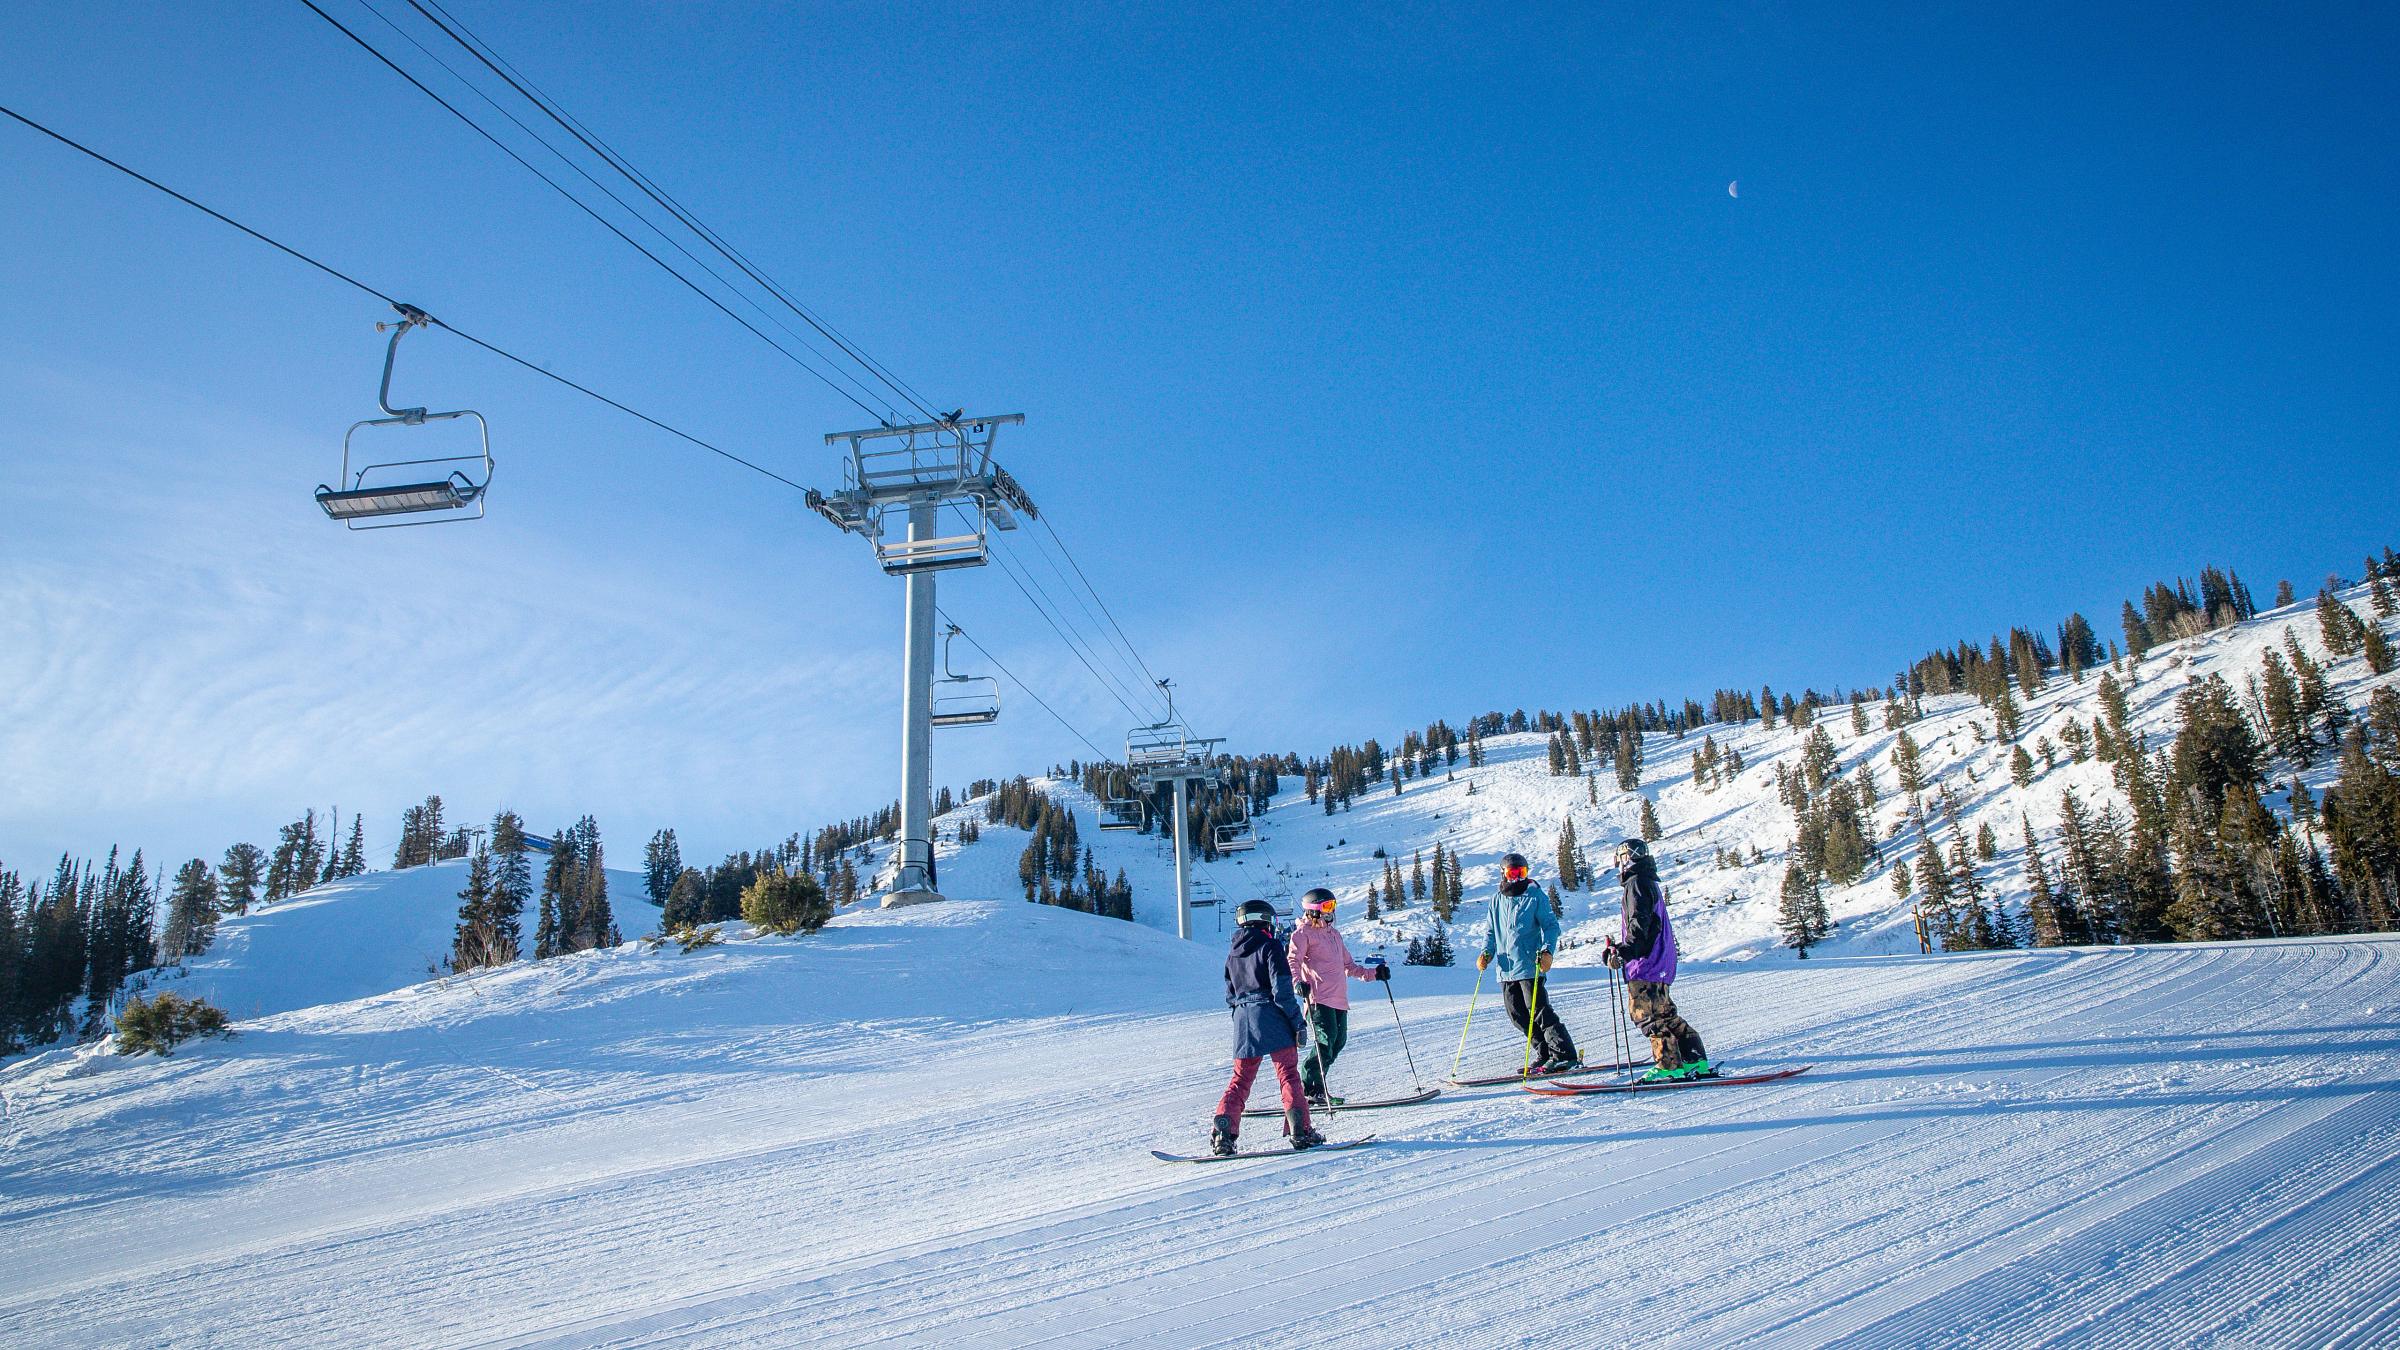 Four friends on skis and snowboard stop to chat on the groomed slopes of Solitude Mountain Resort